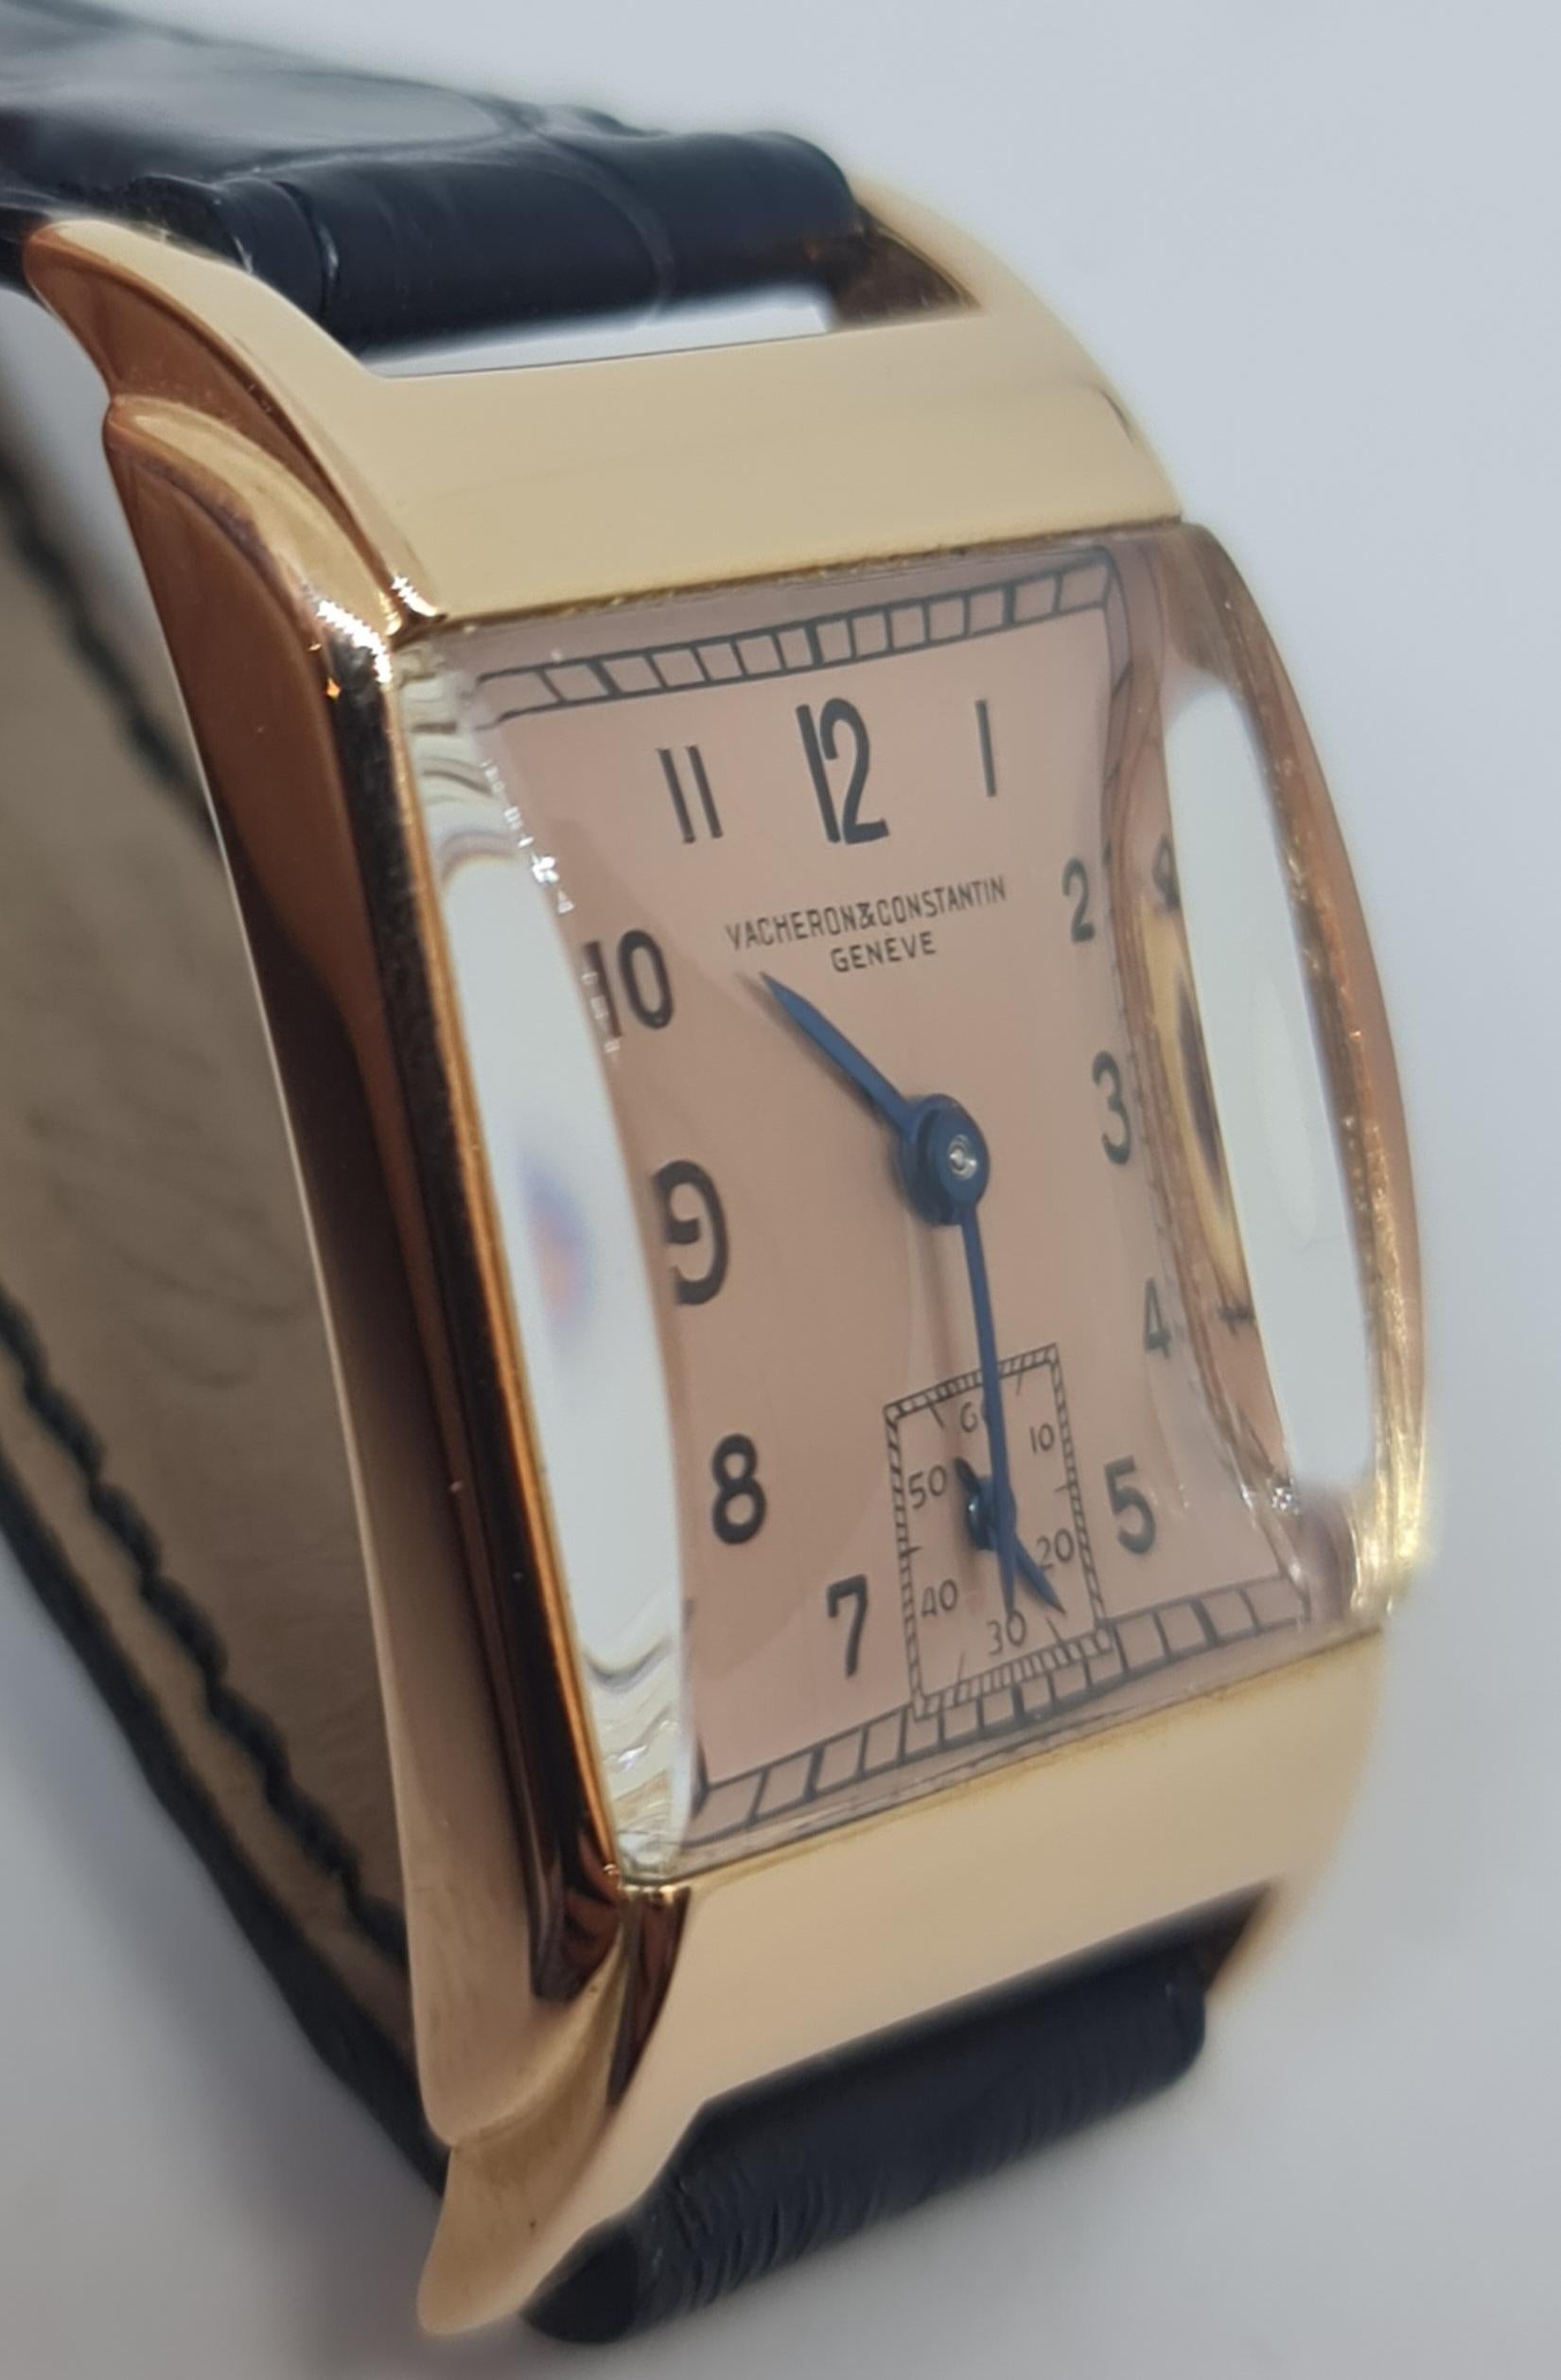 Artisan 18kt Pink Gold Vacheron Constantin Manual Winding, Excellent Condition from 1935